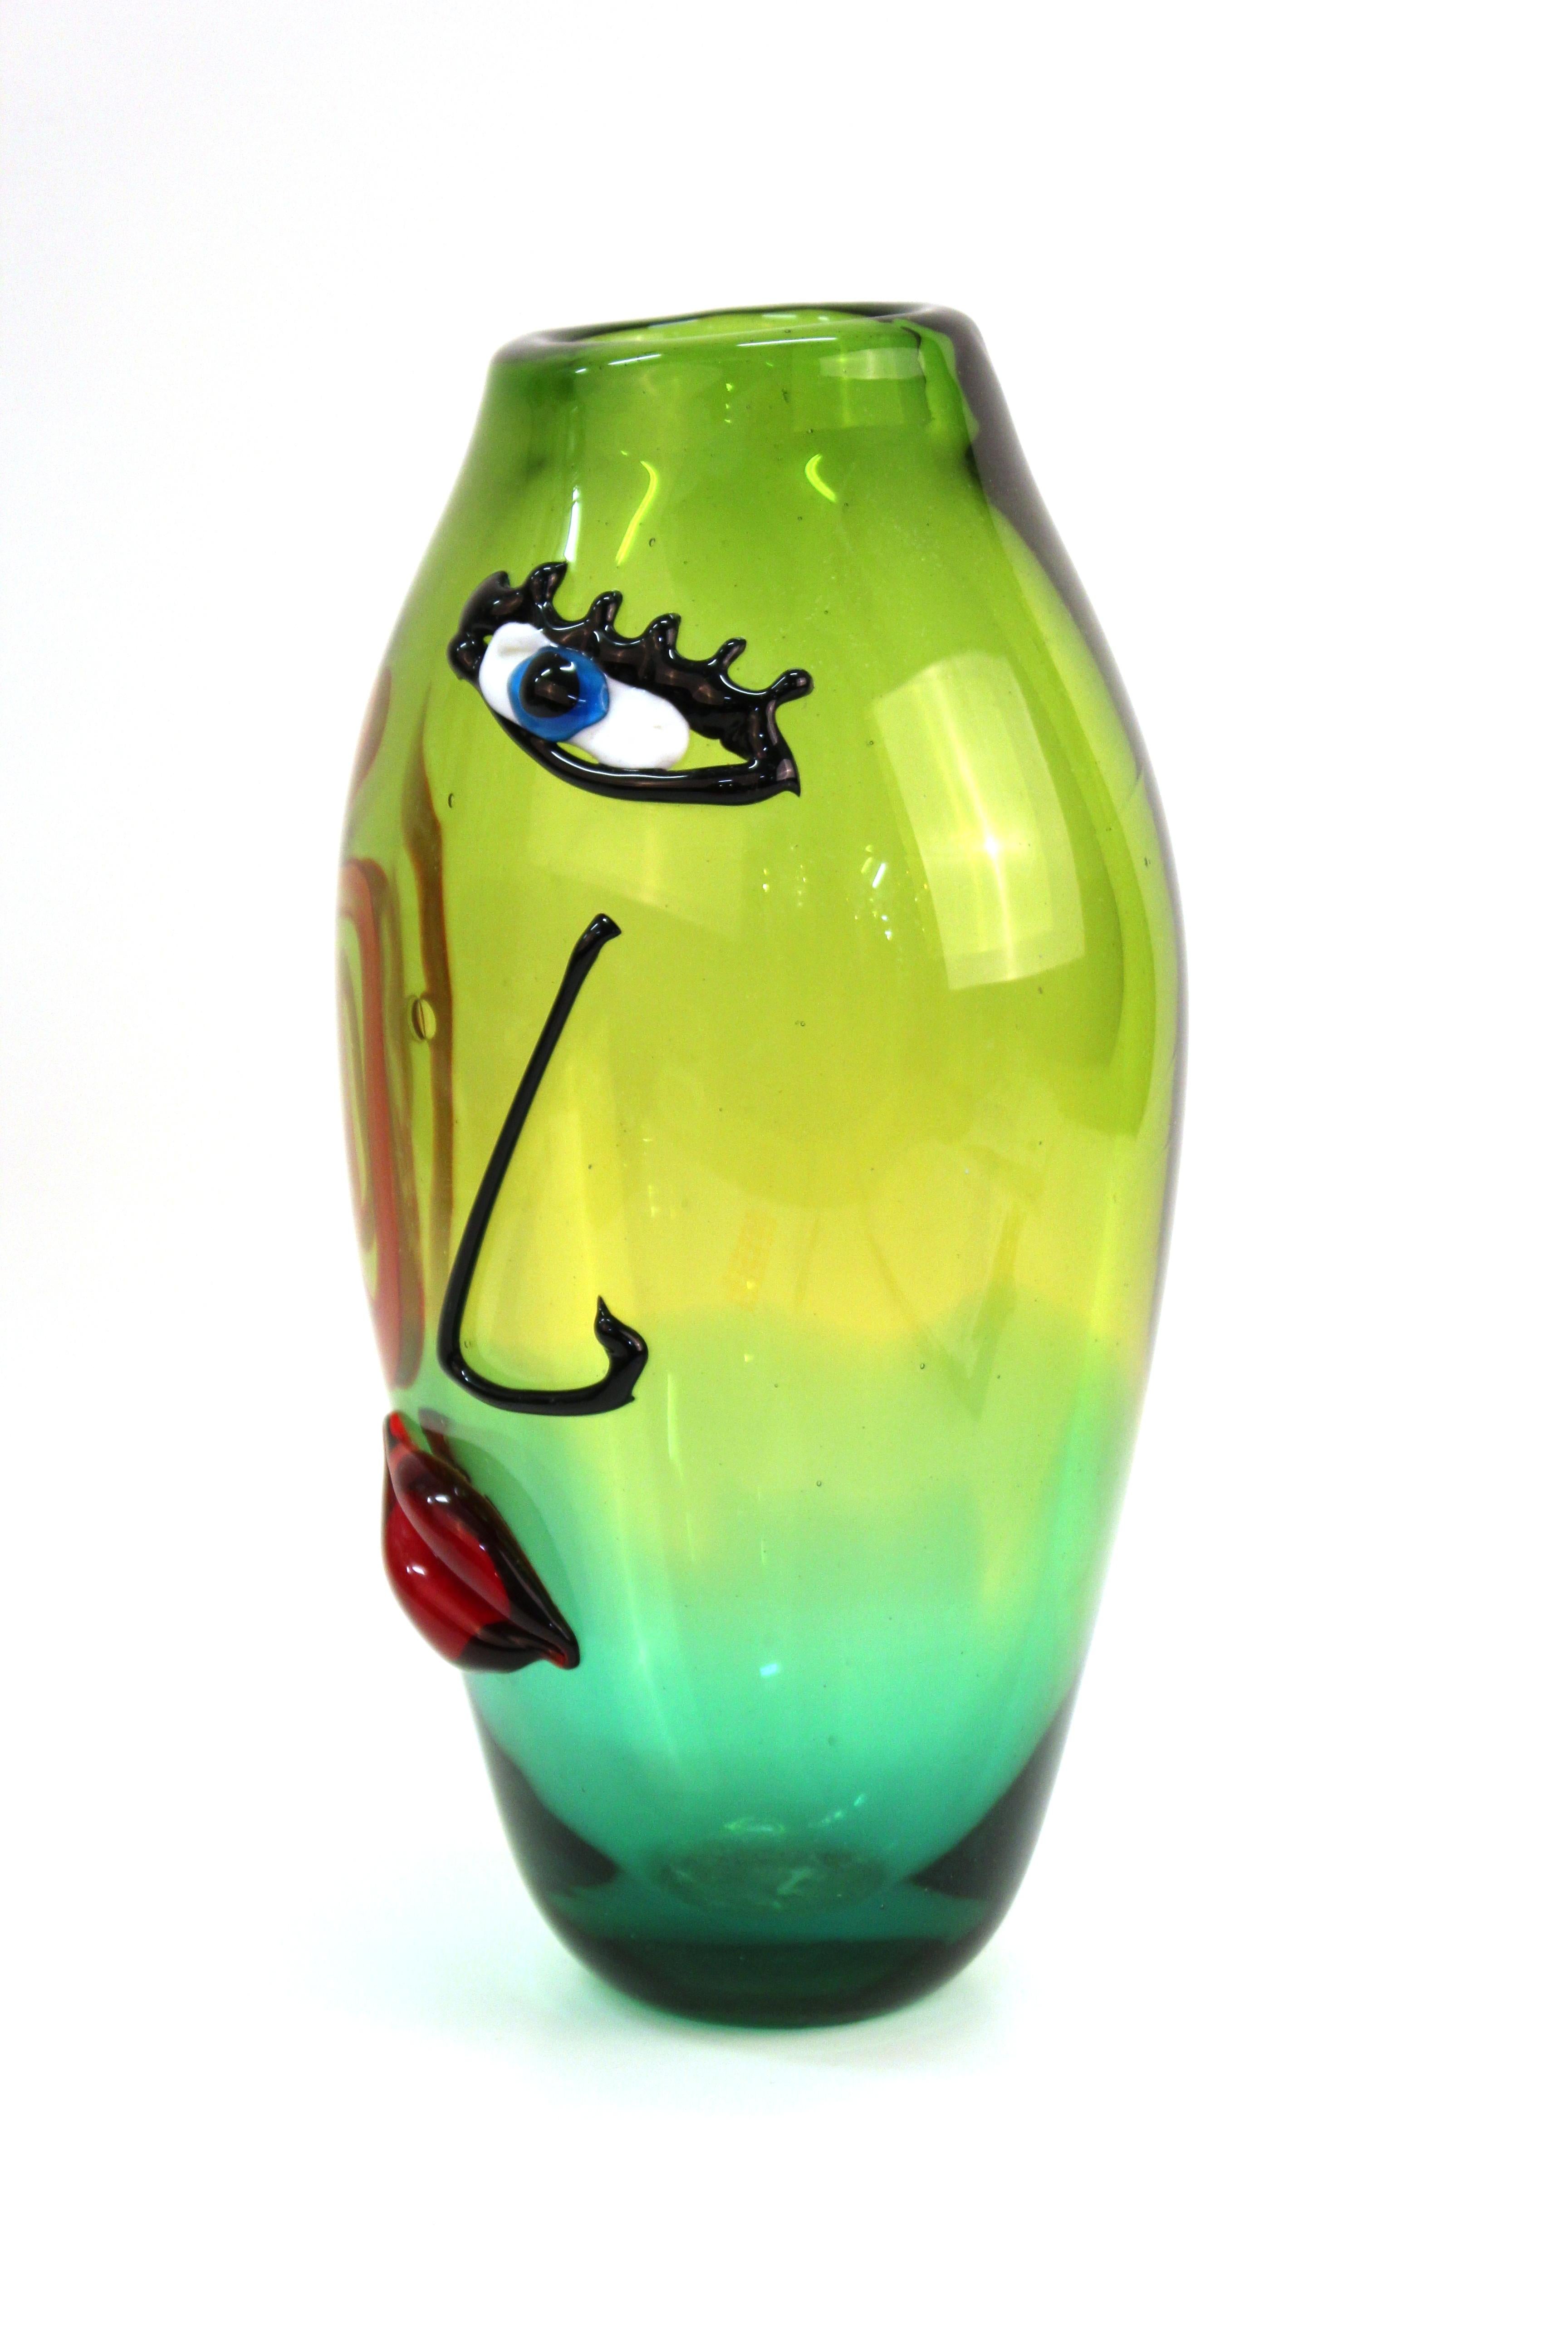 Italian Postmodern art glass vase attributed to Maestro Giuliano Tosi. The piece was made in Murano in the late 20th century and presents an abstract face with an eye on the front side. Murano glass label on the bottom. In great vintage condition